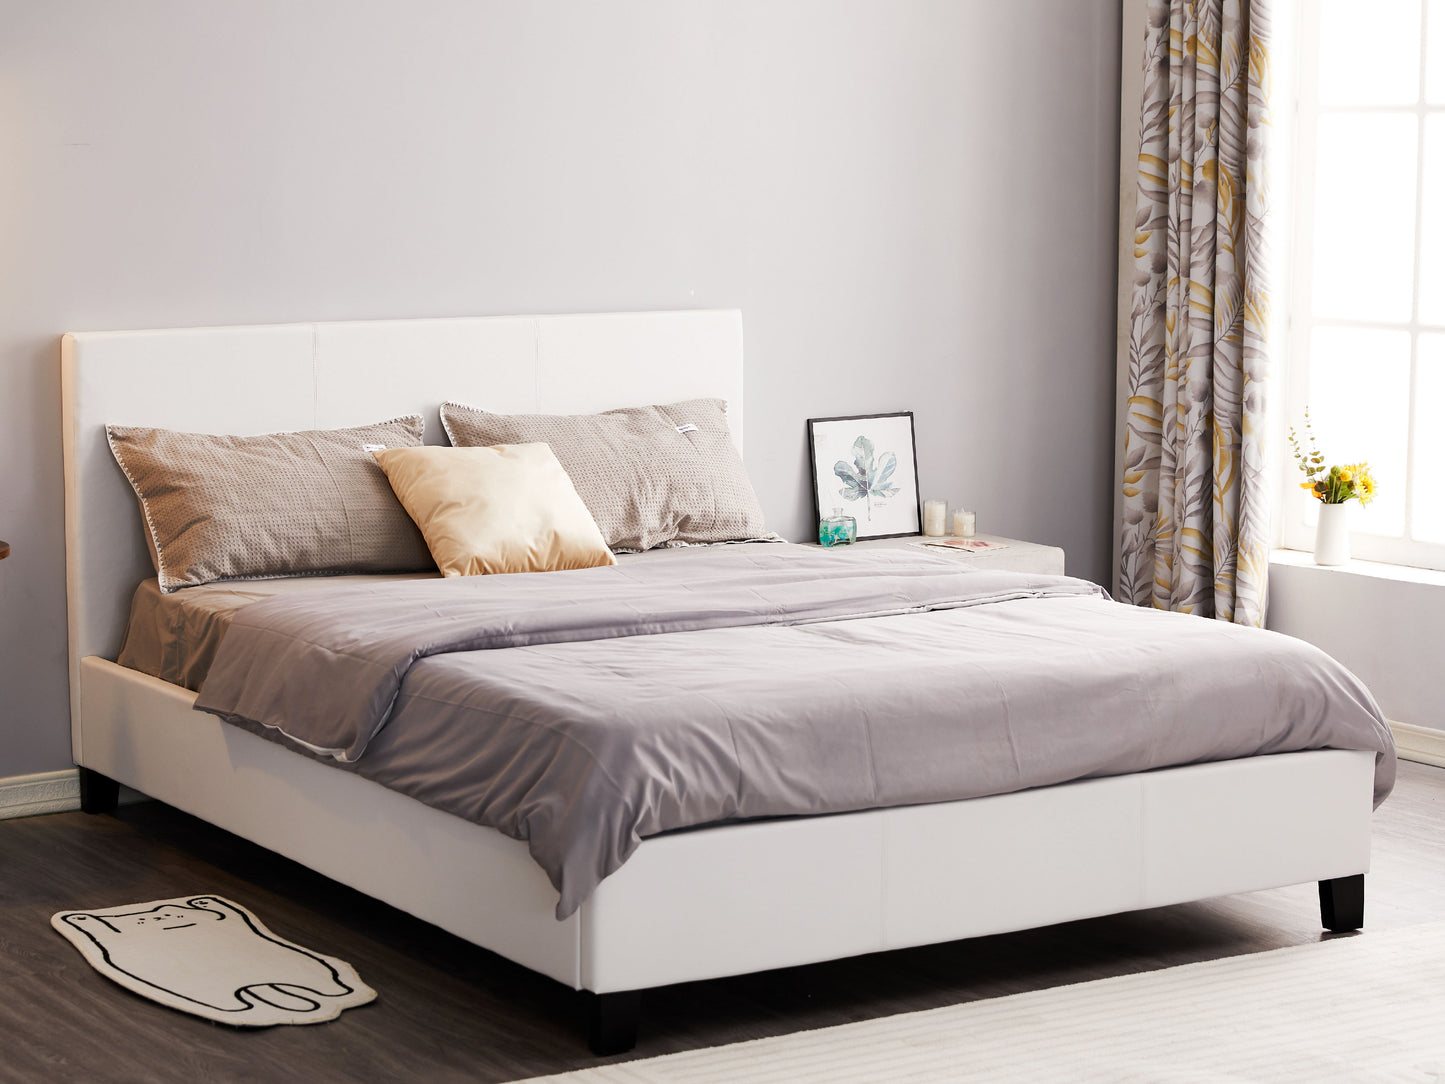 Monarch Pu Leather Bed Frame